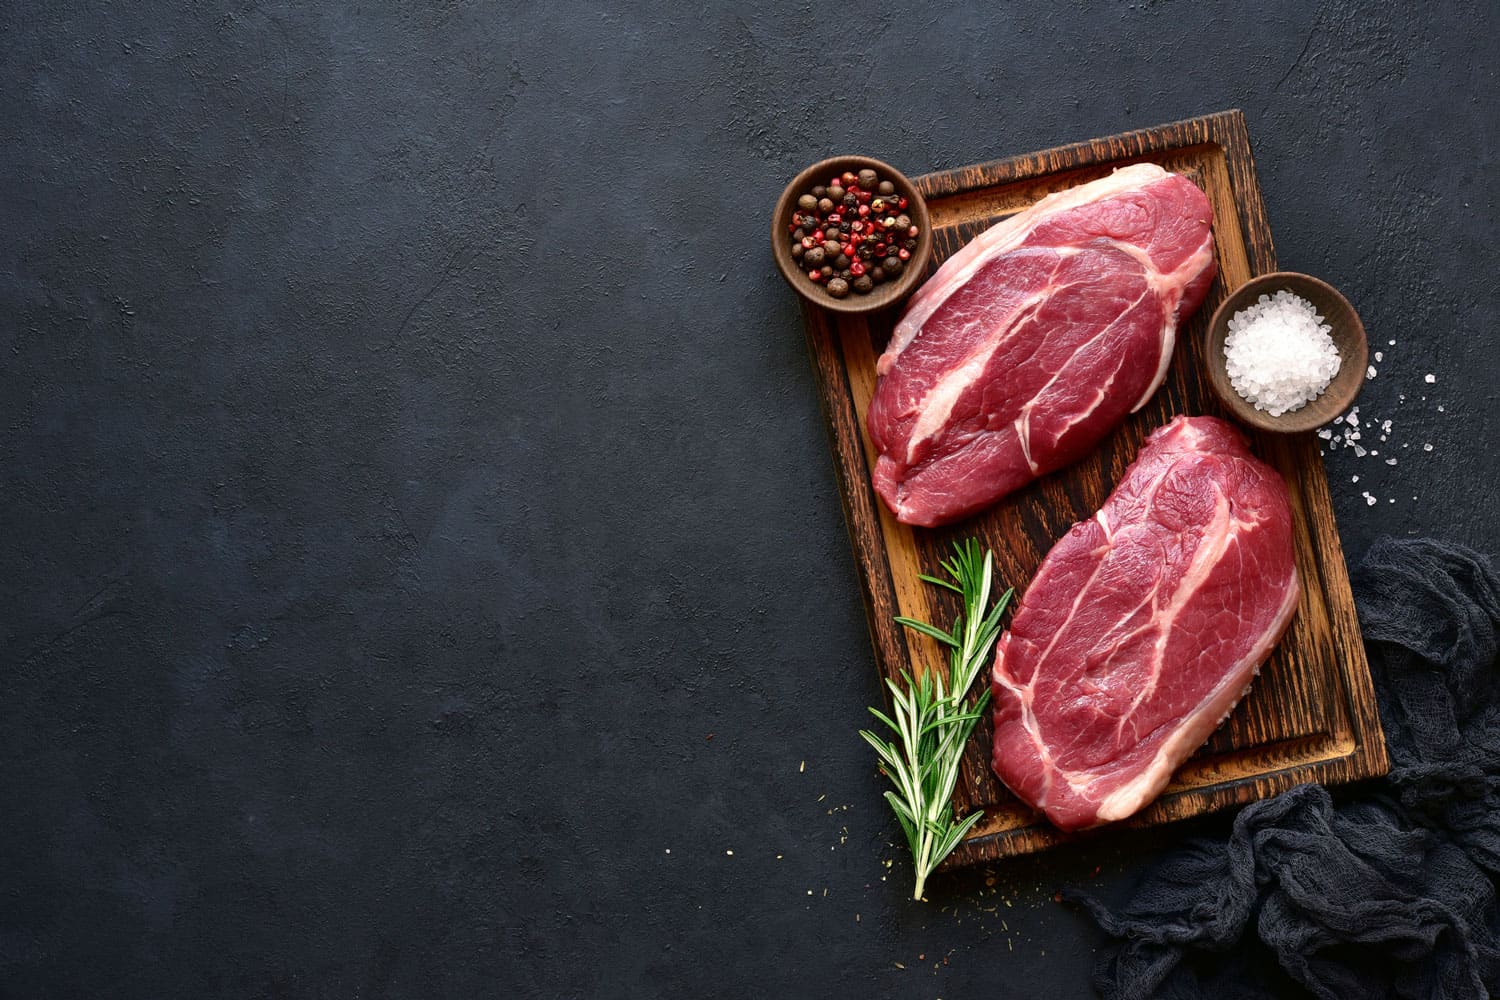 Raw organic marbled beef steaks with spices on a wooden cutting board on a black slate, stone or concrete background, Should You Always Marinate Steak? [Inc. 11 Awesome Steak Marinade Ideas]